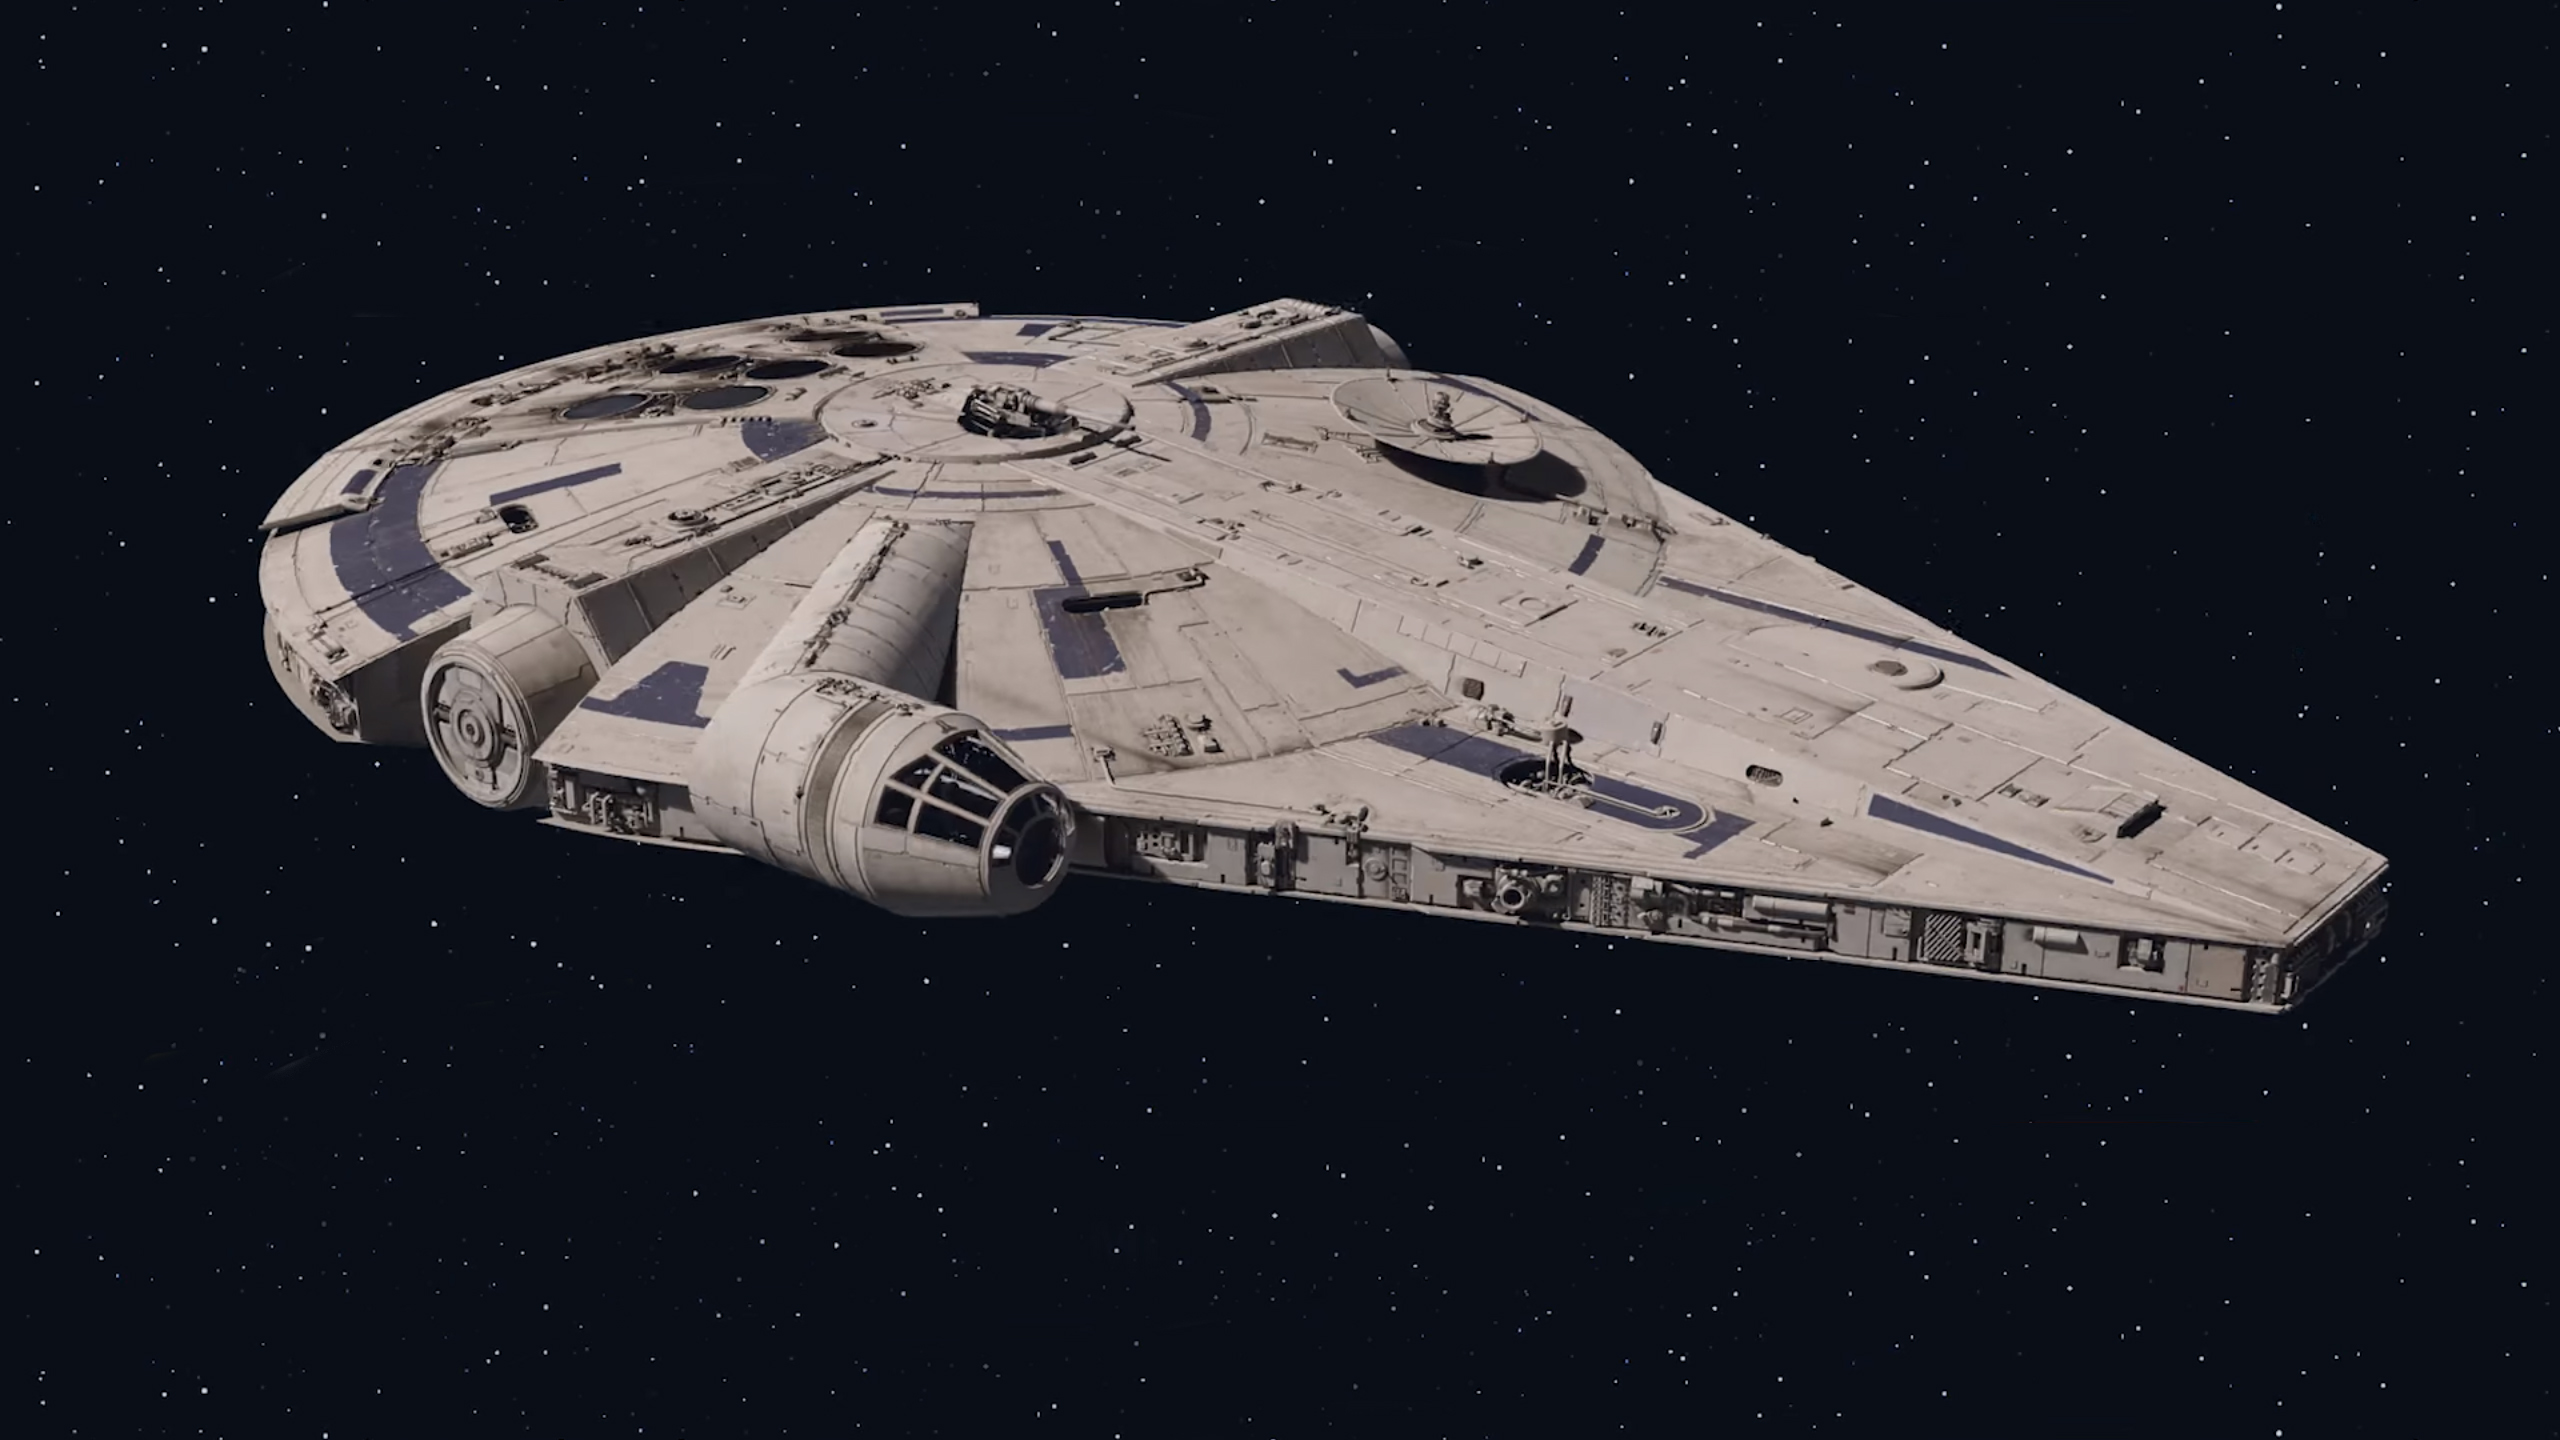 the-brand-new-millennium-falcon-corellian-freighter-solo-a-star-wars-story-hi-res-model-1.jpg